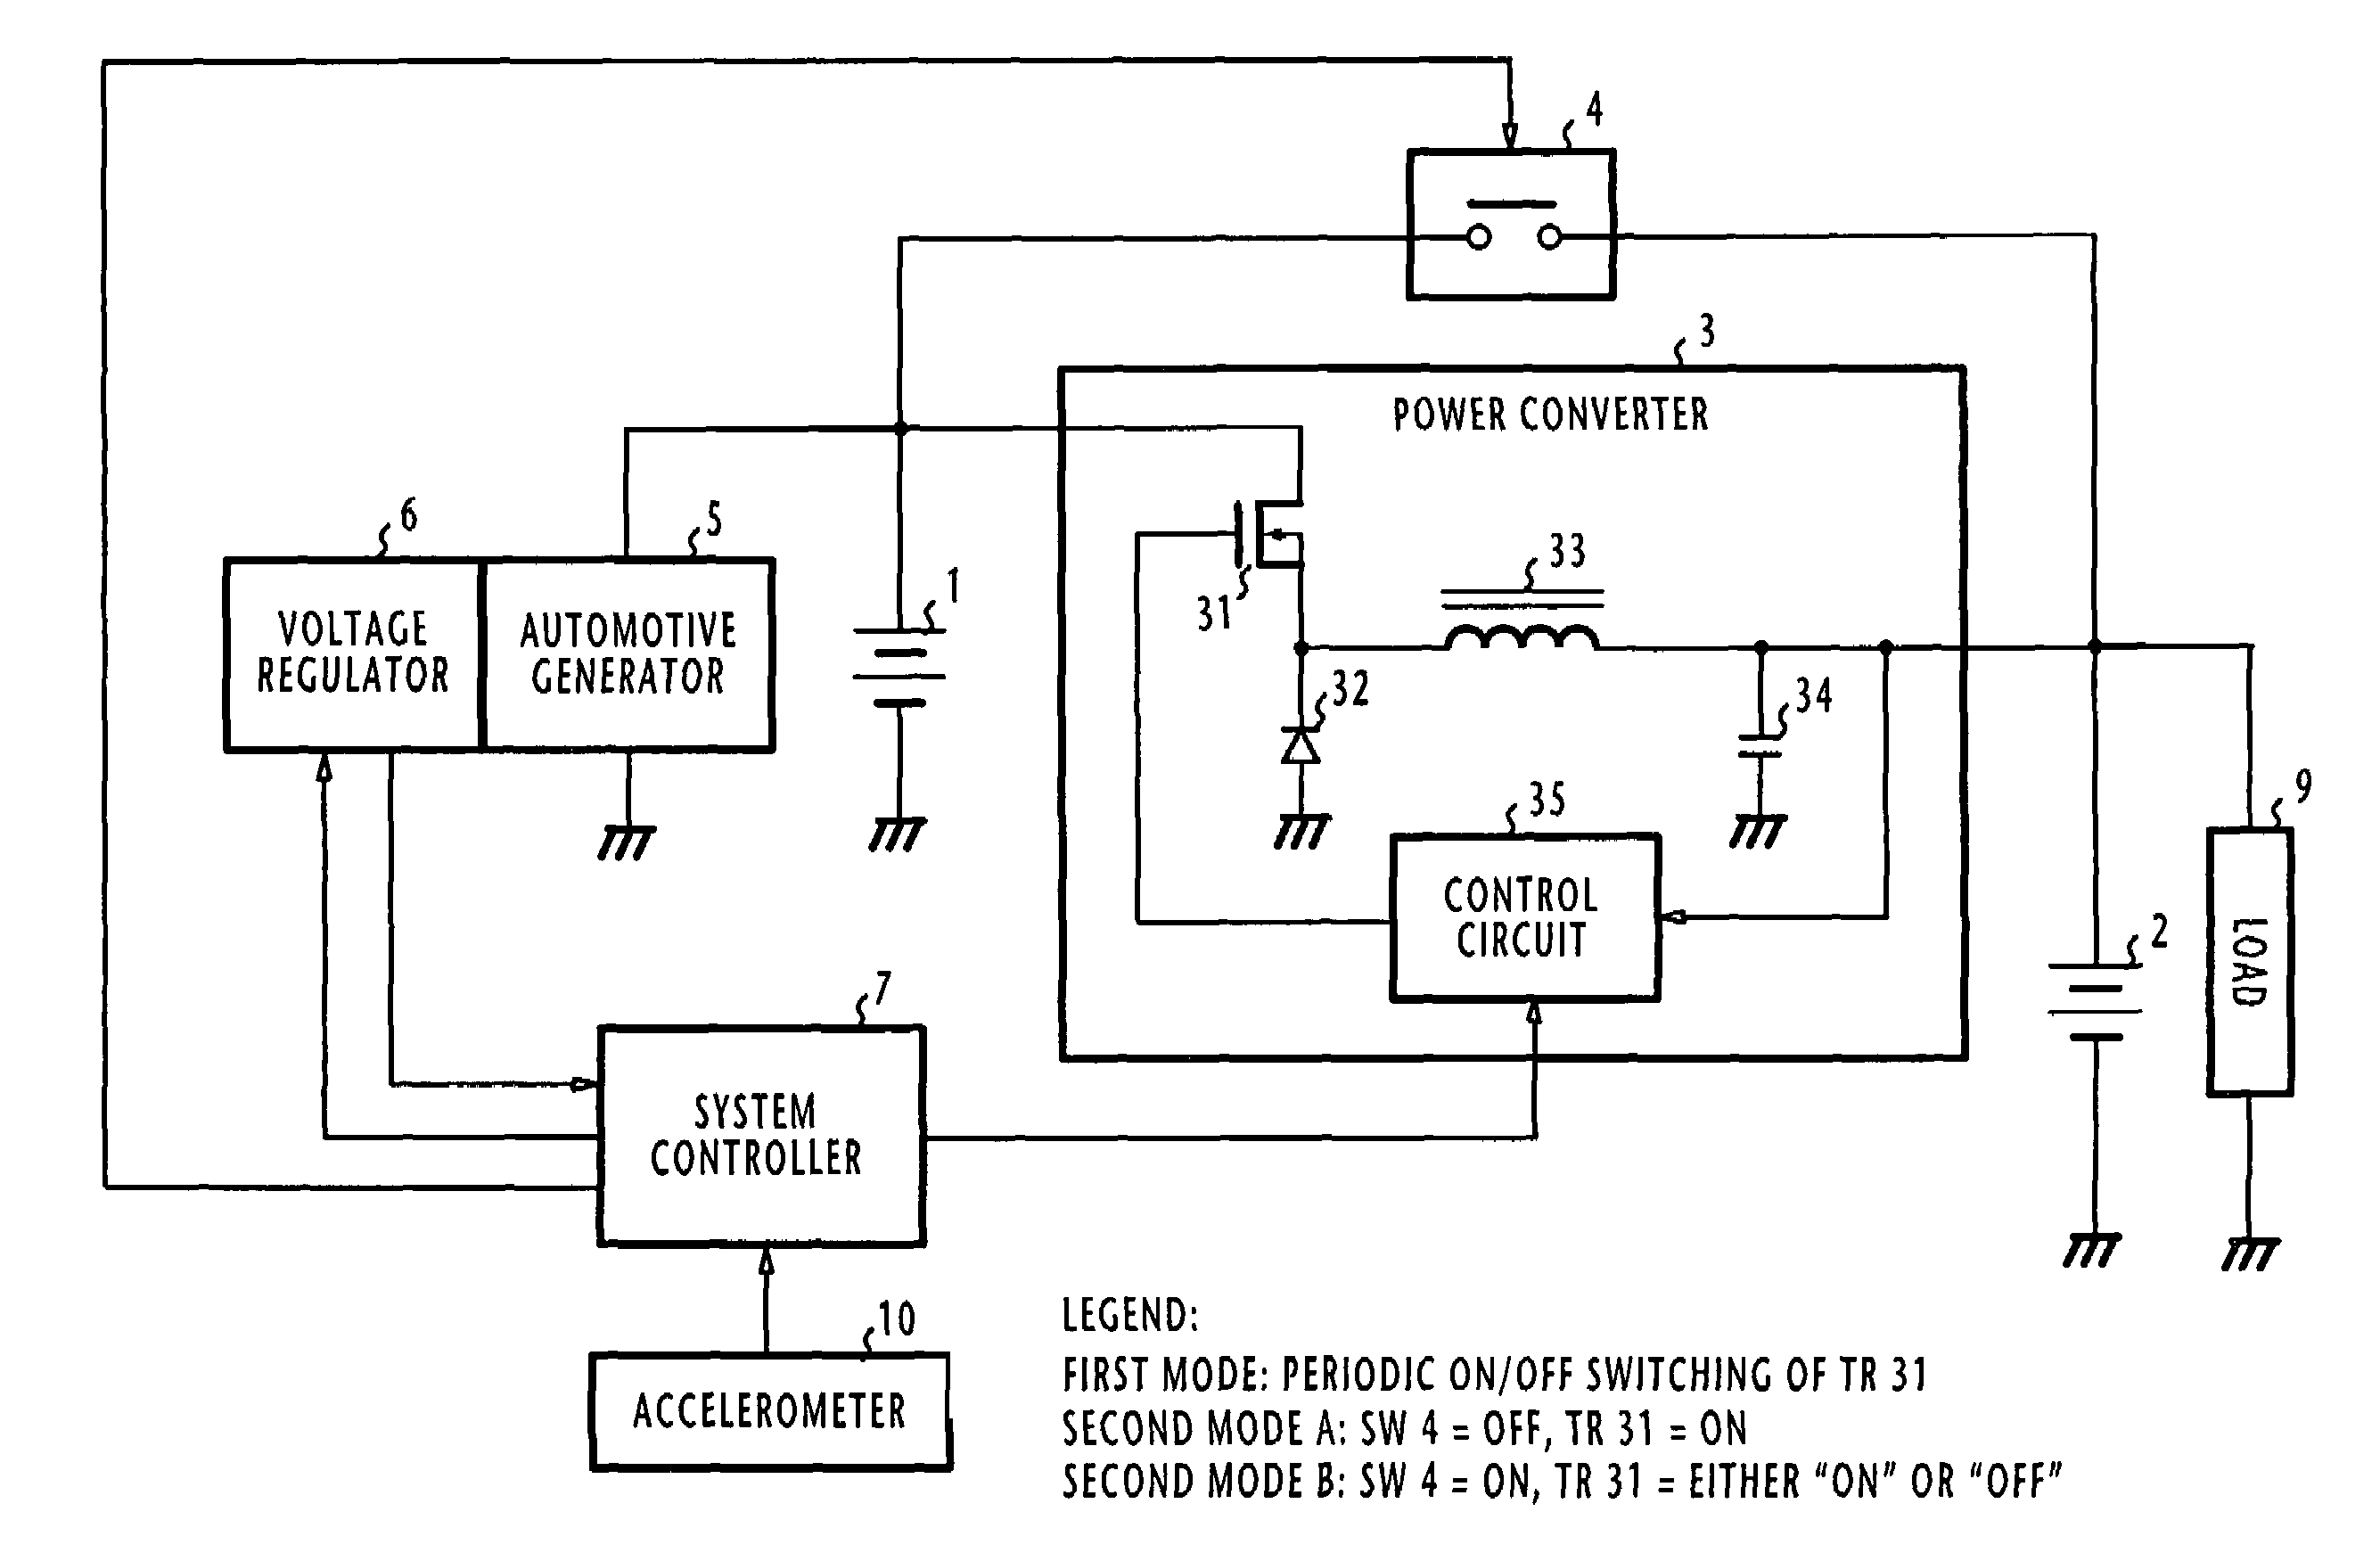 Vehicle-mounted power supply system